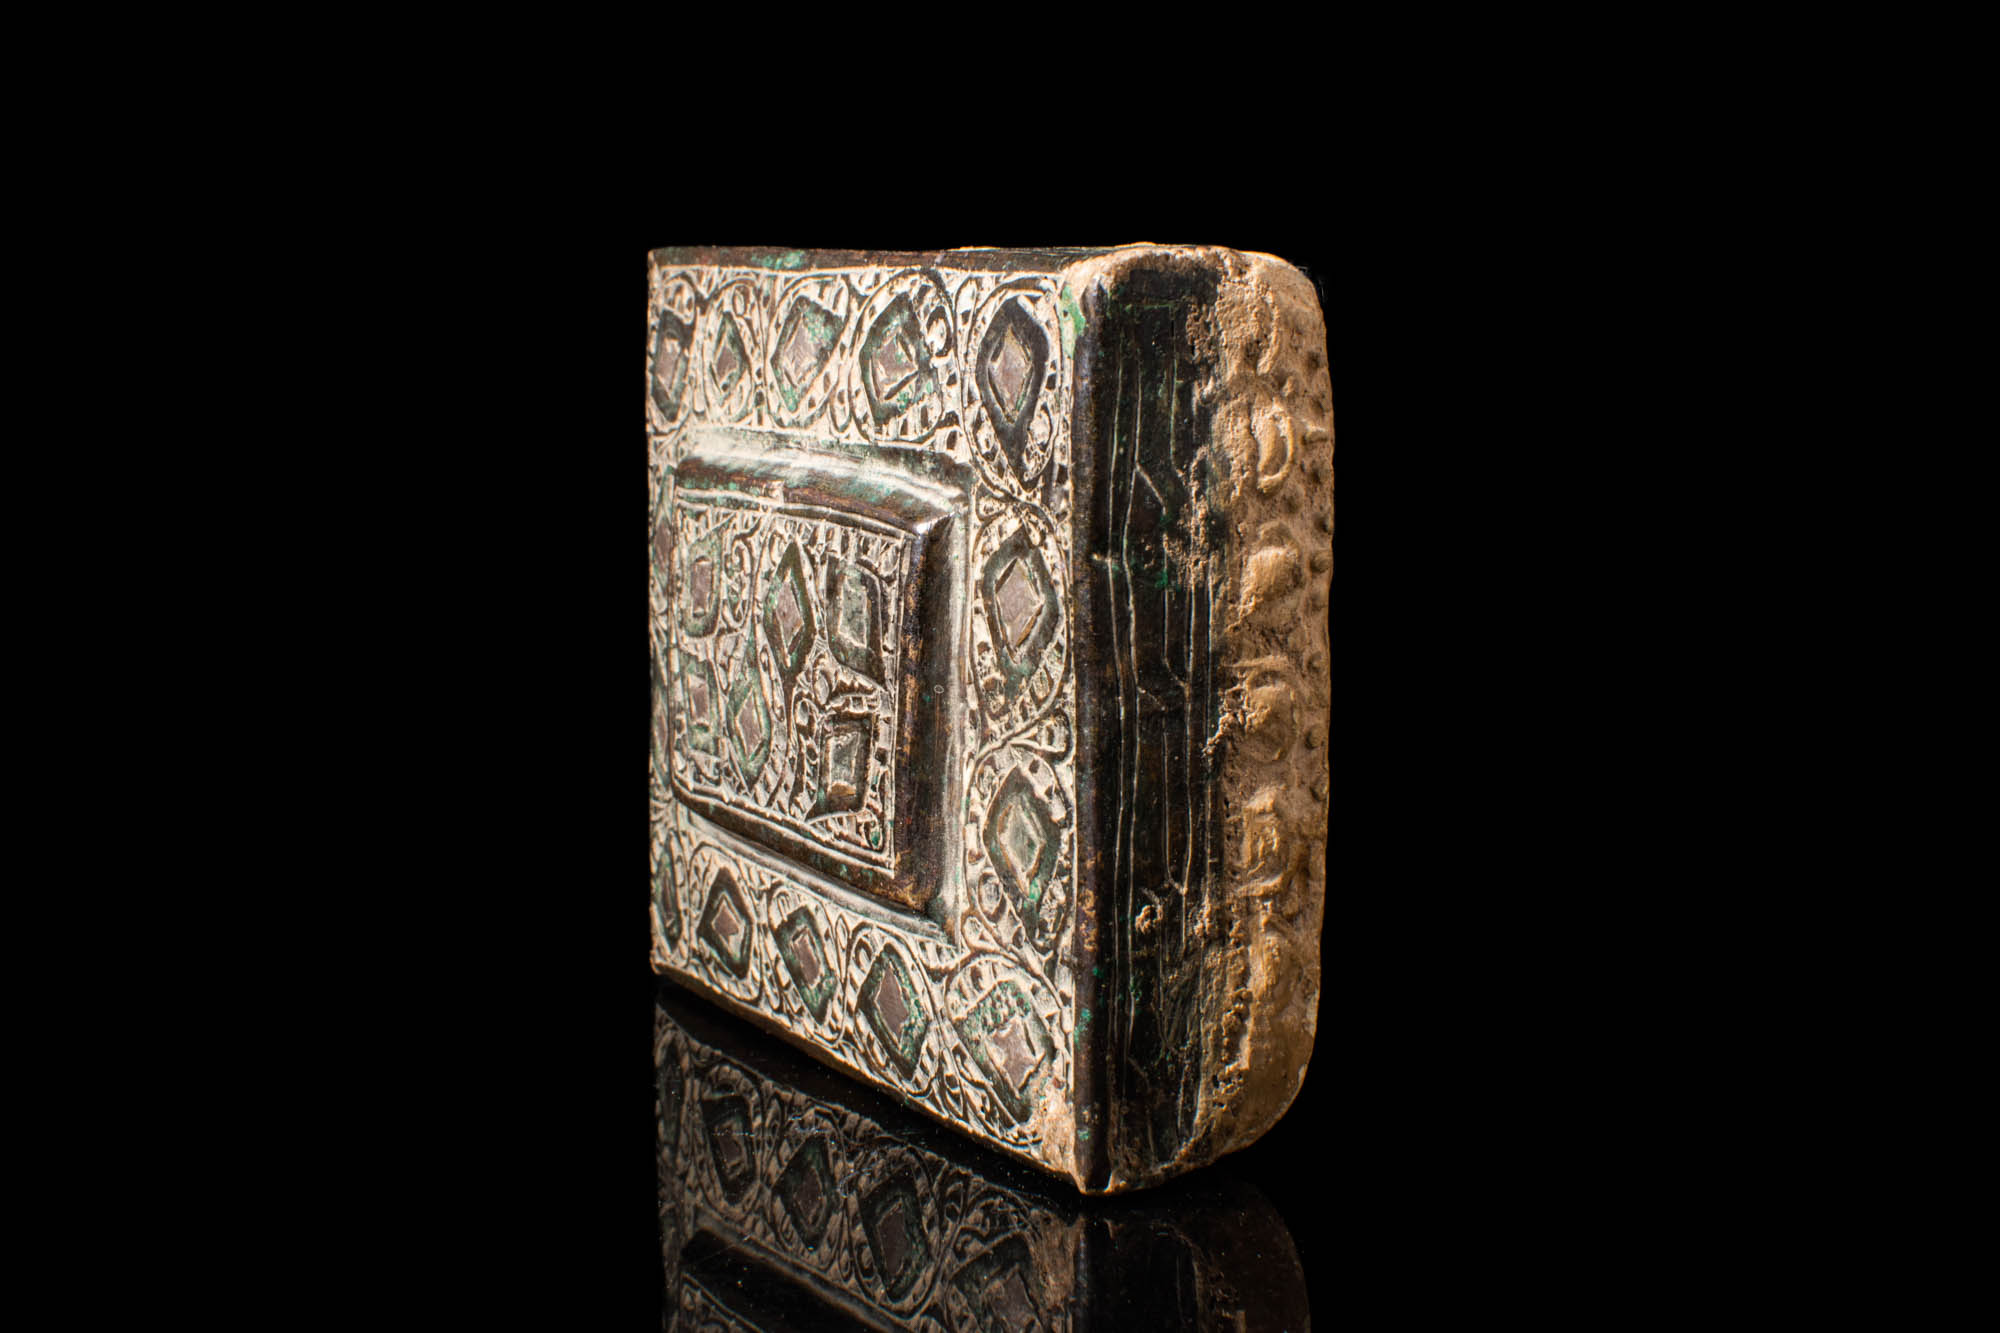 SAFAVID BOX COVER DECORATED WITH FLORAL MOTIFS - Image 2 of 4